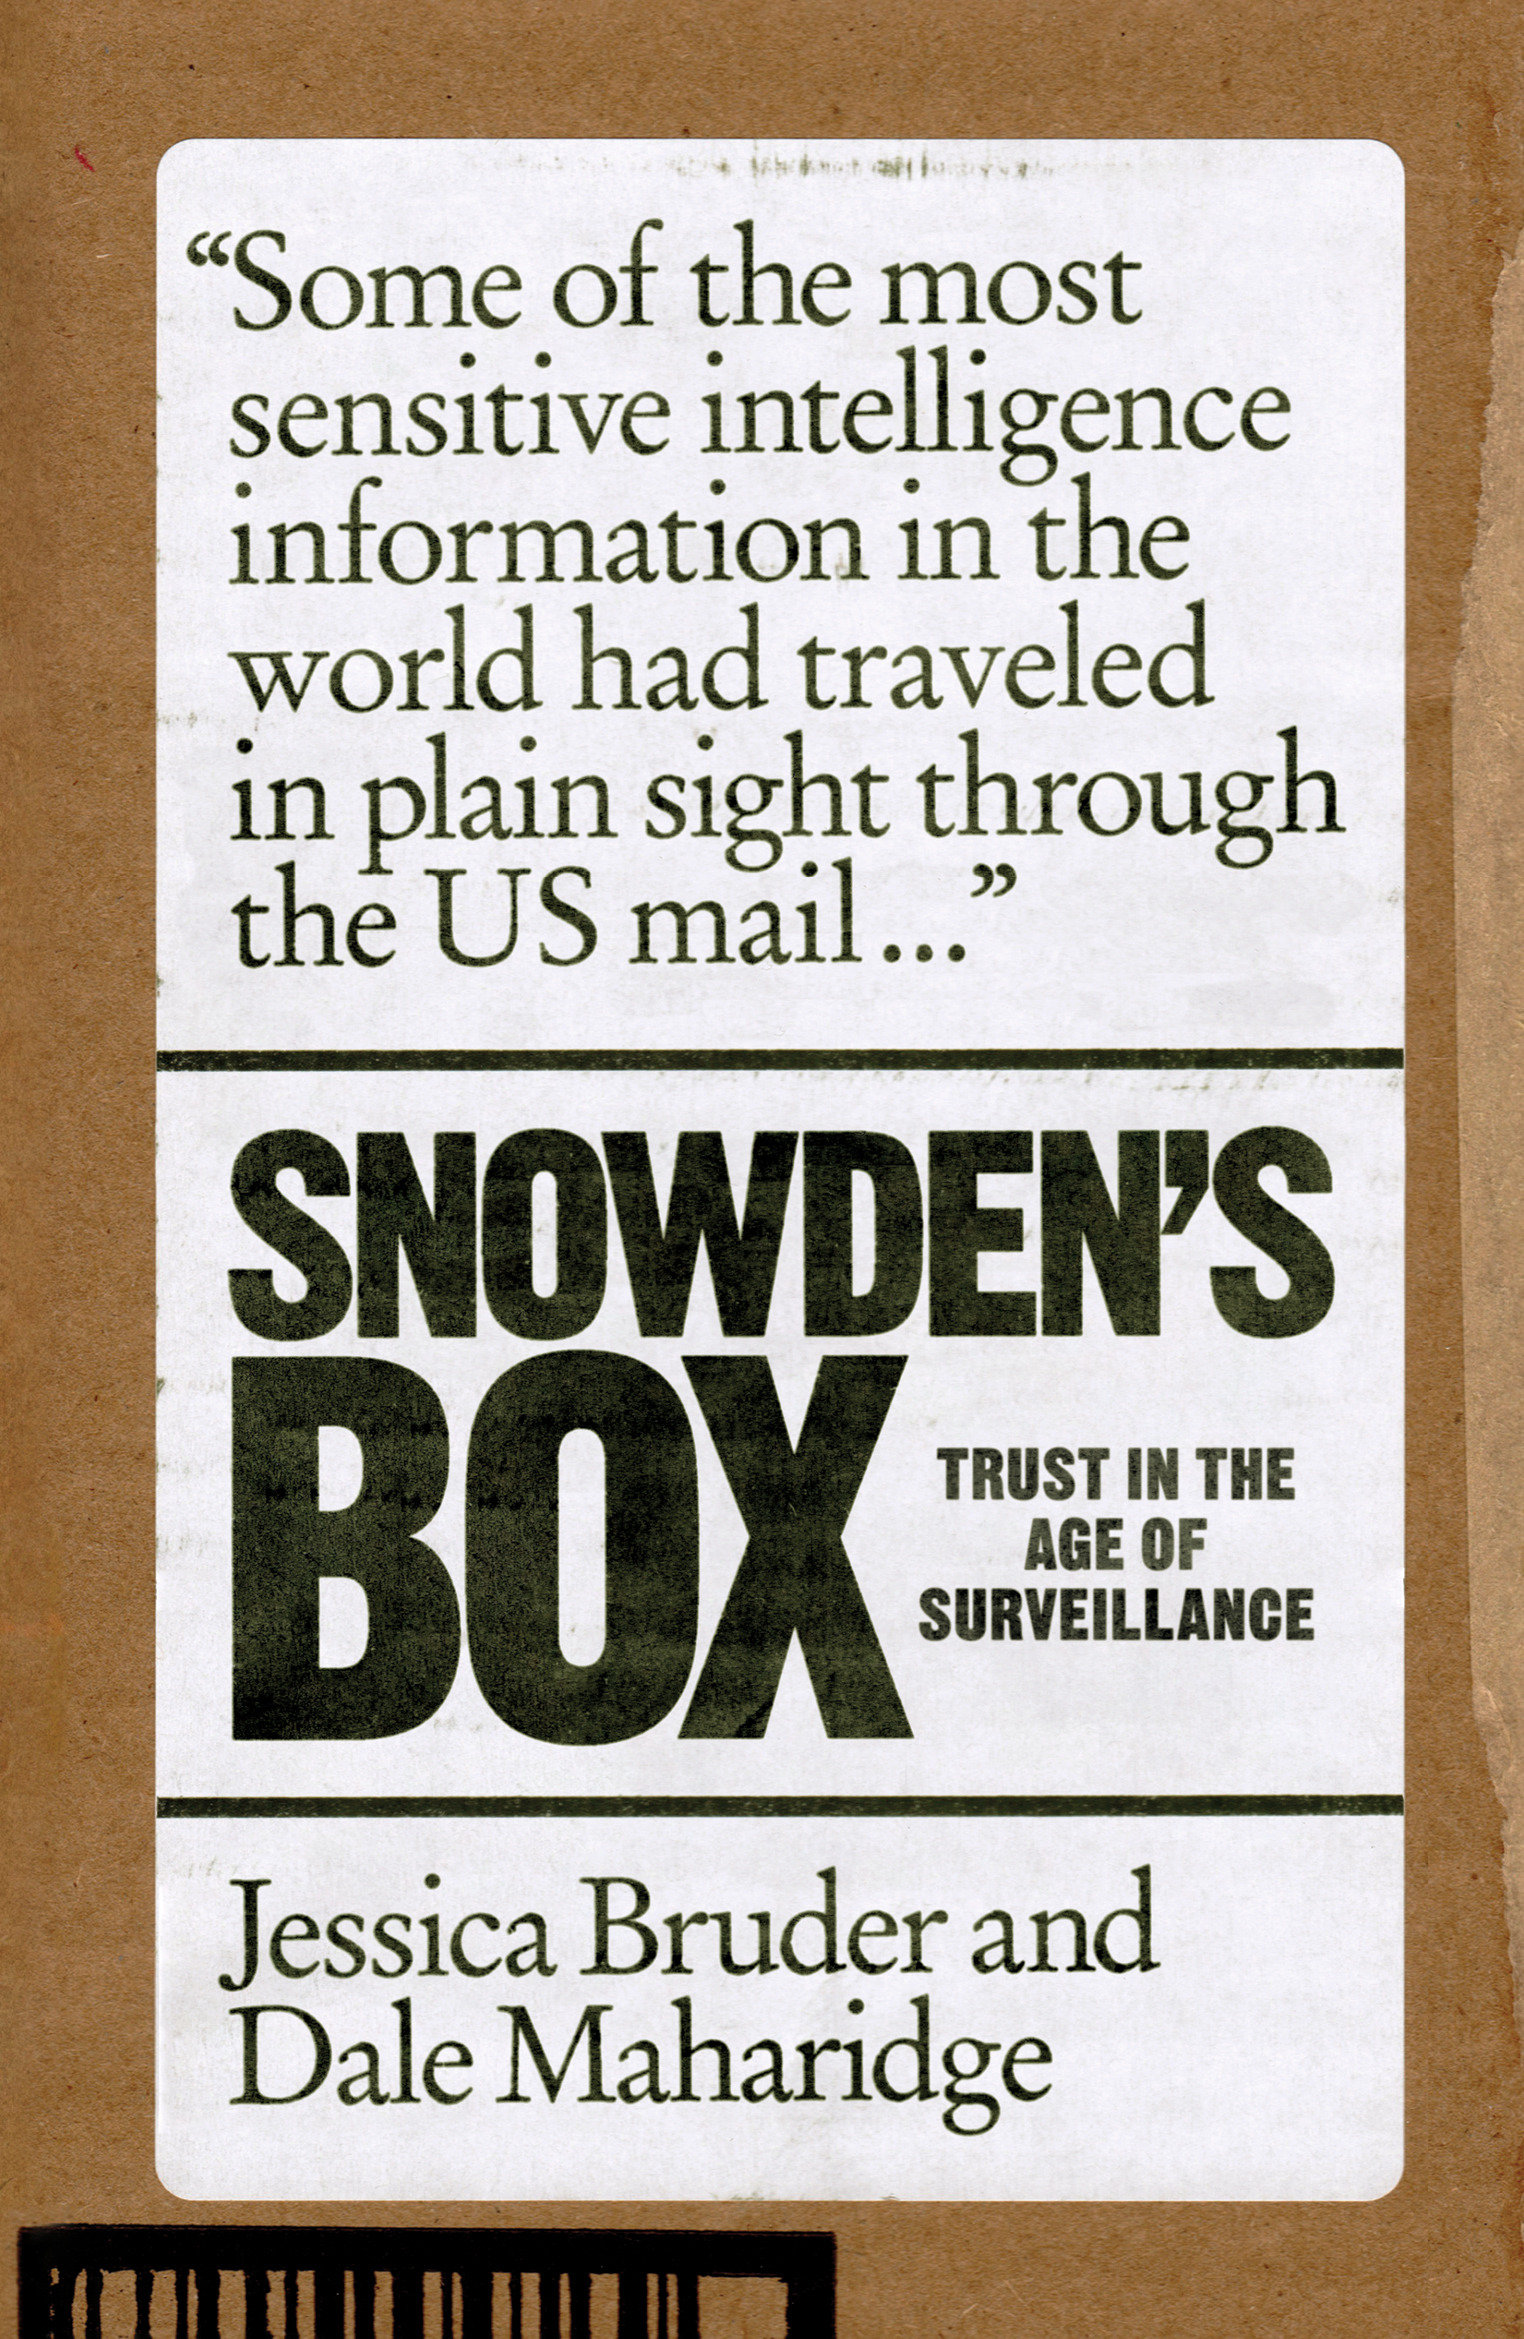 Snowden's Box Trust in the Age of Surveillance cover image